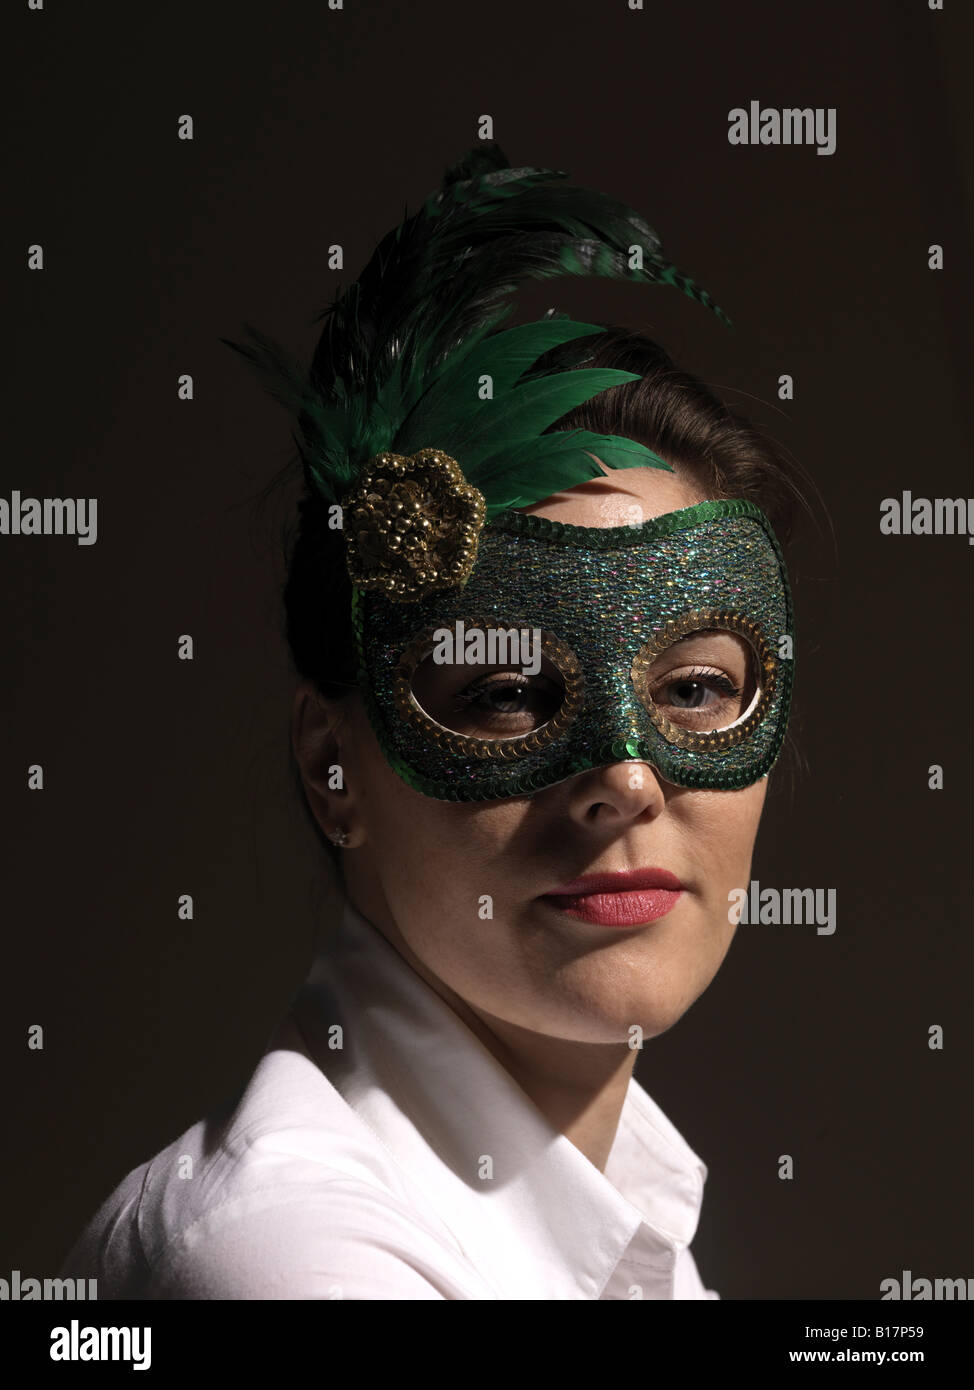 Enigmatic young woman in green mask against black background Stock Photo